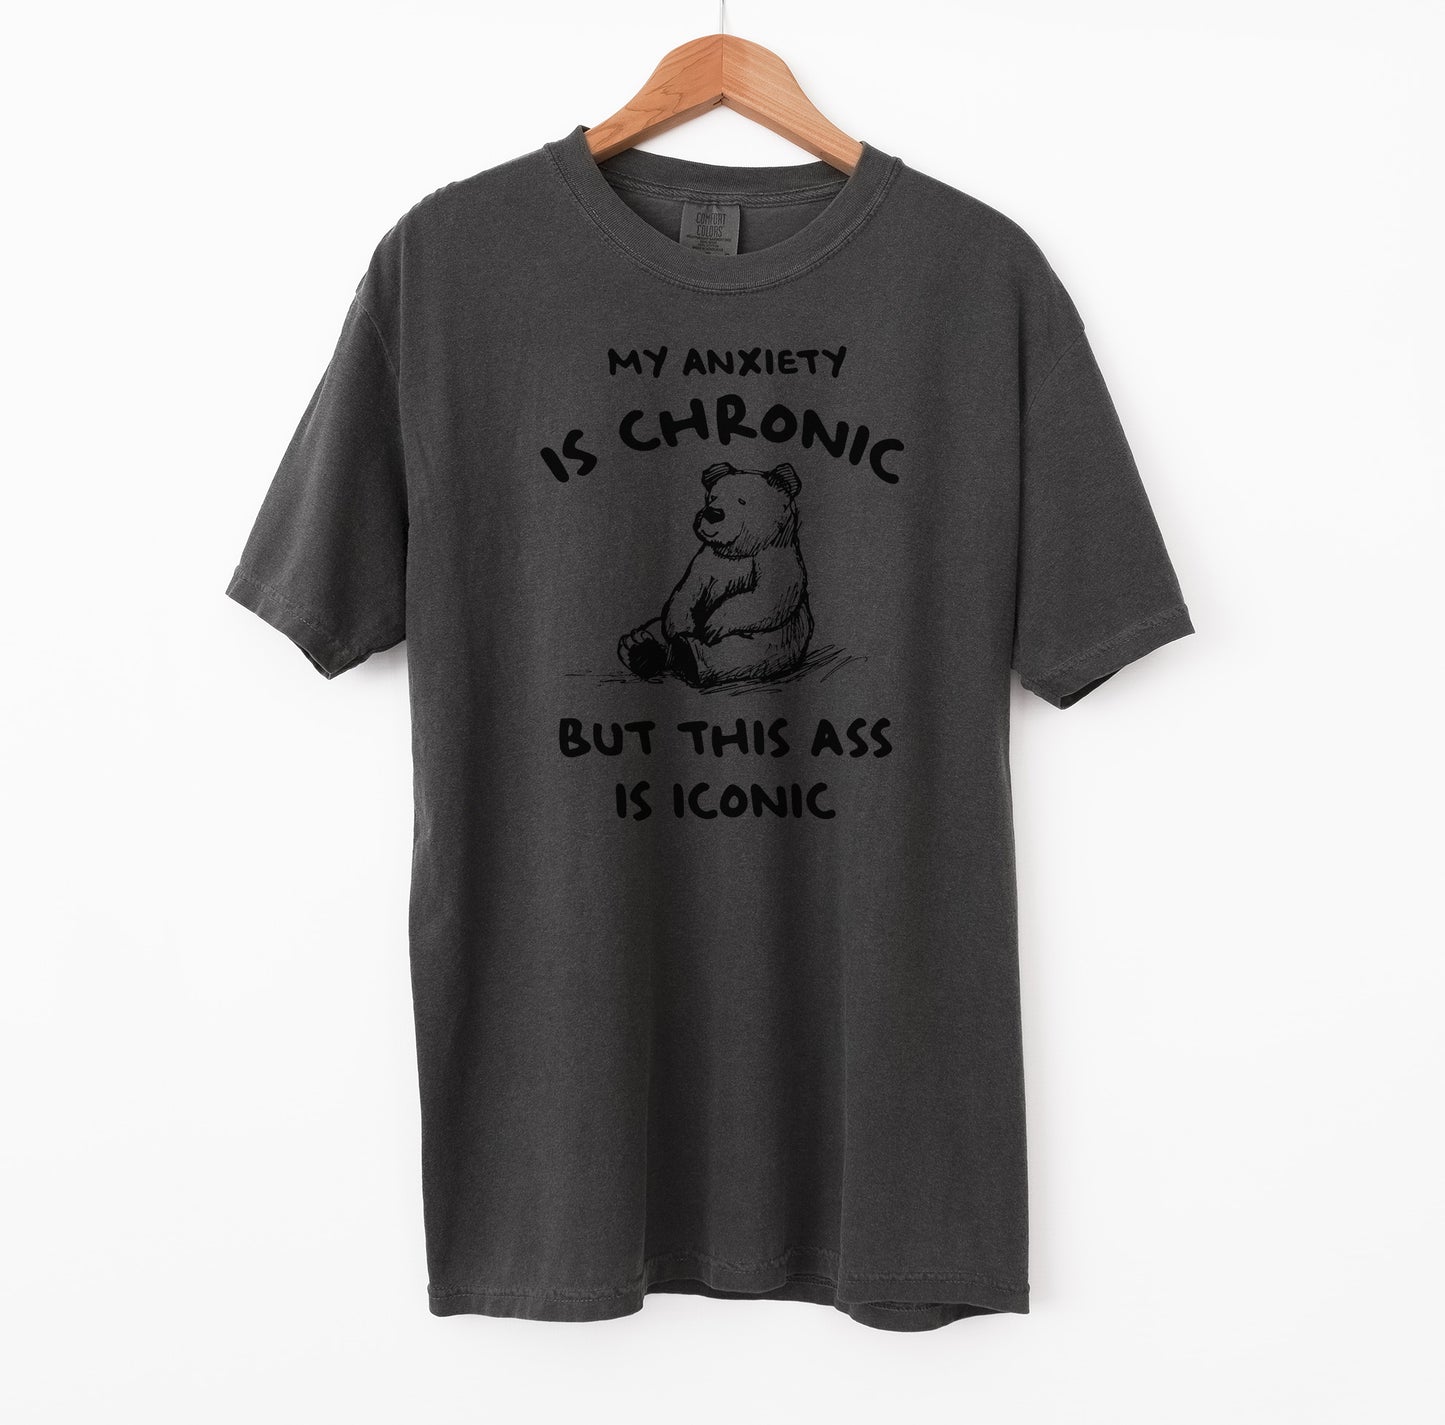 My Anxiety is Chronic T-Shirt